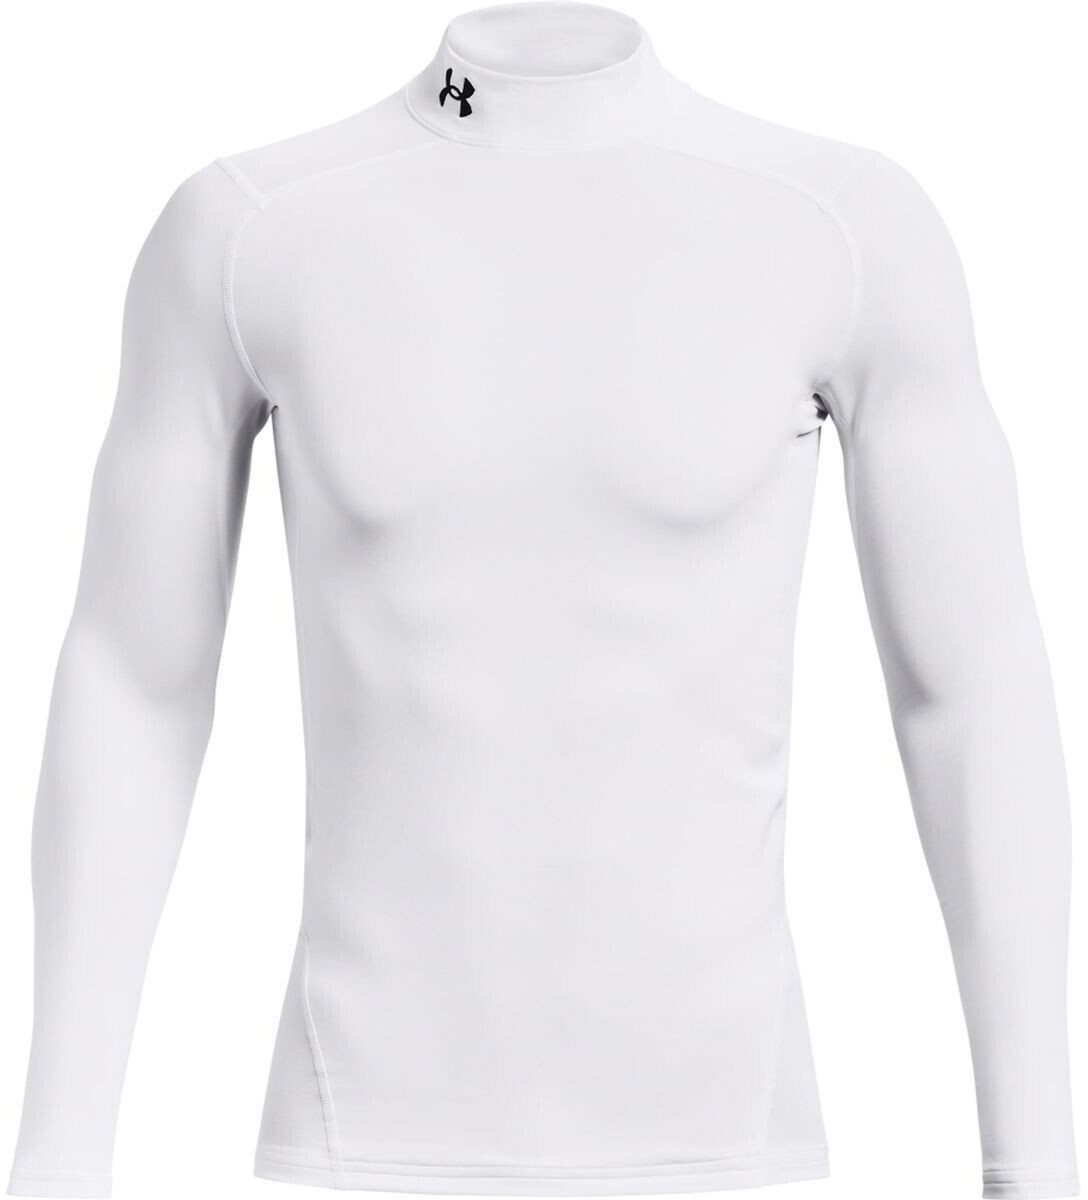 Best Armour (Today) Mock (1366072) on from £26.00 Deals Armour Buy Under ColdGear Compression –